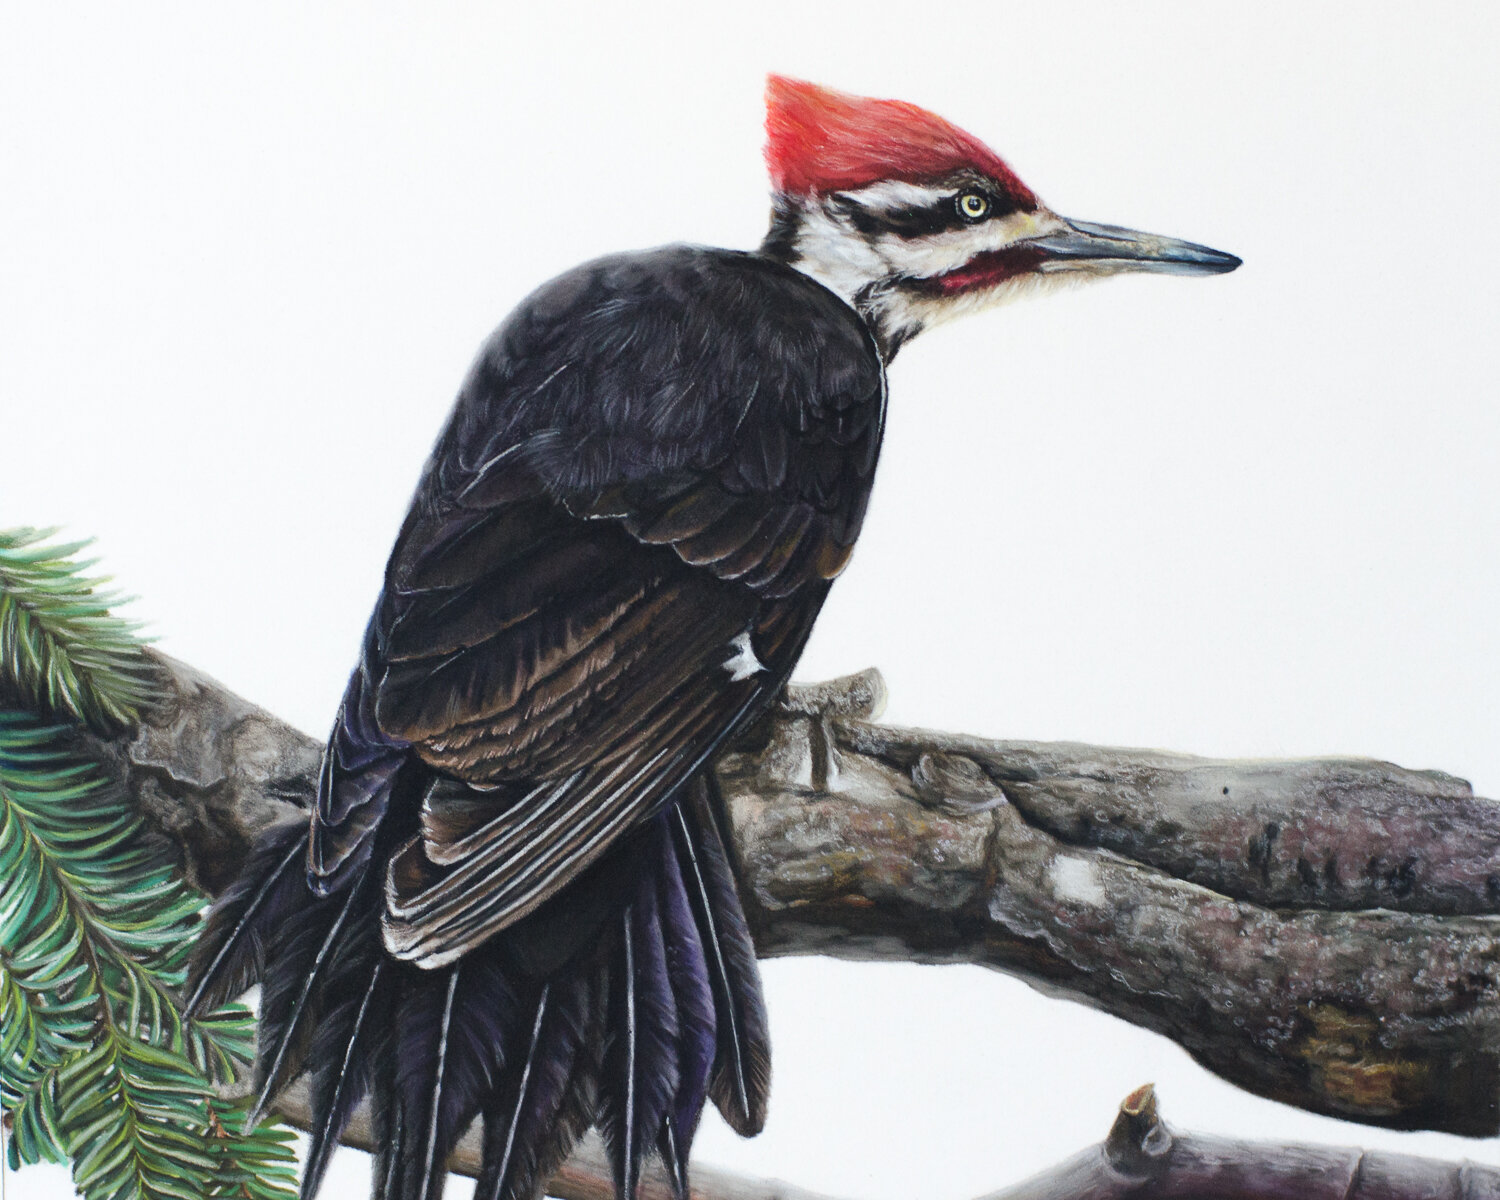  Pileated woodpecker in pastel, 11” x 14” (full piece has been cropped slightly) 